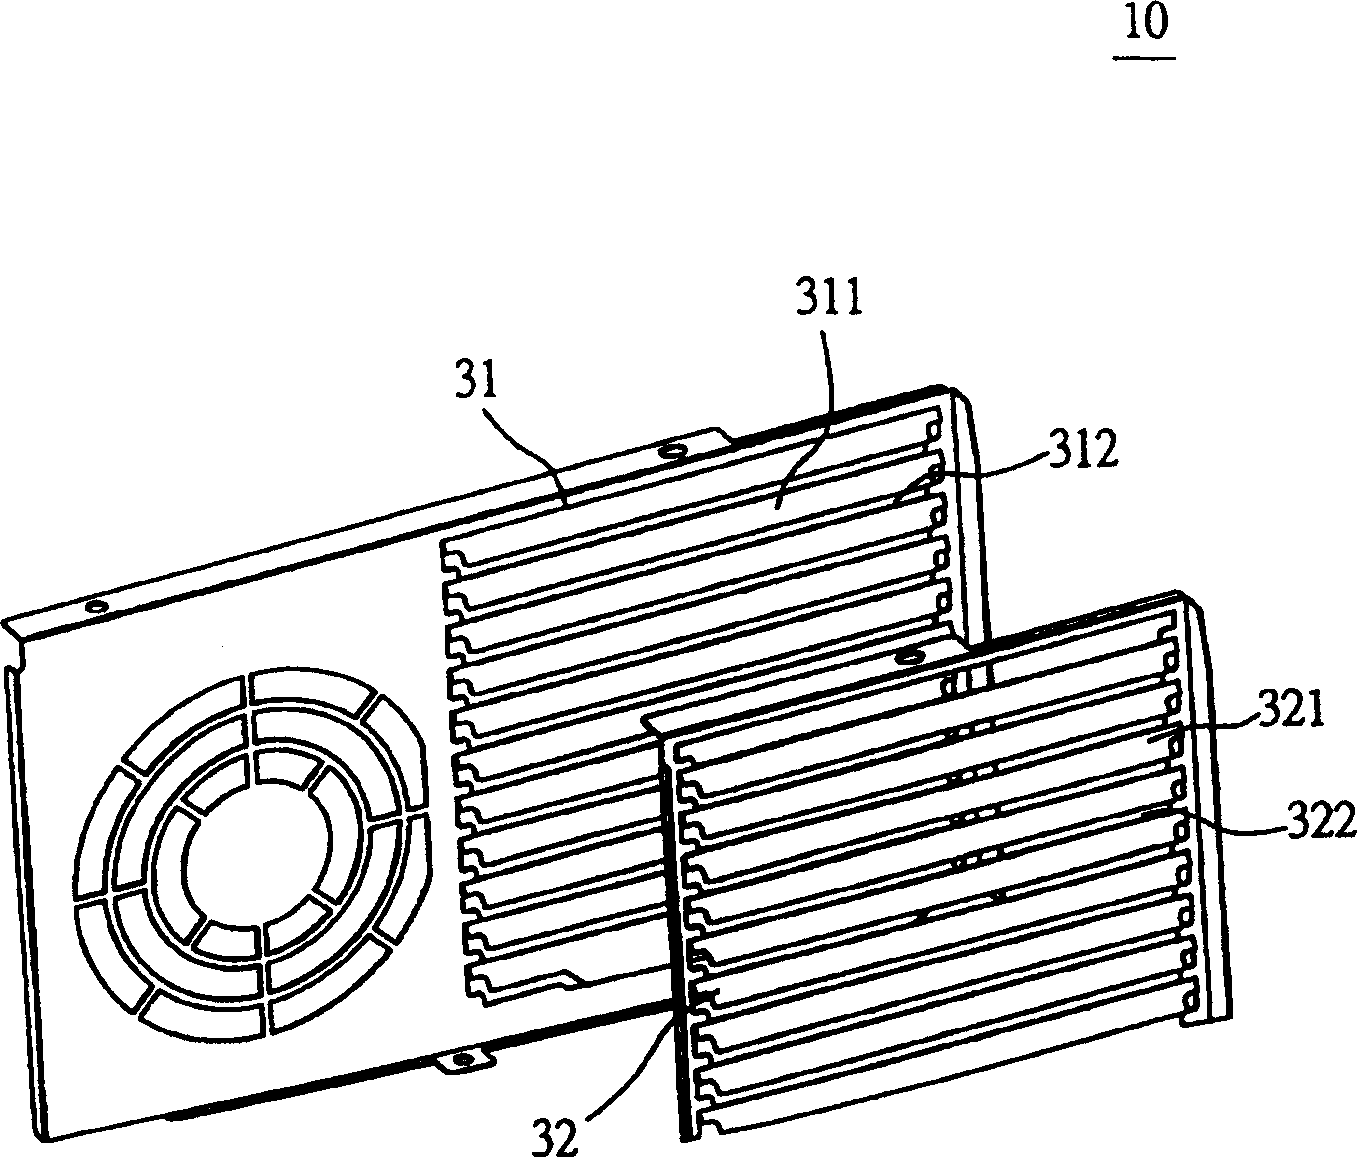 Light-shading wind guiding structure